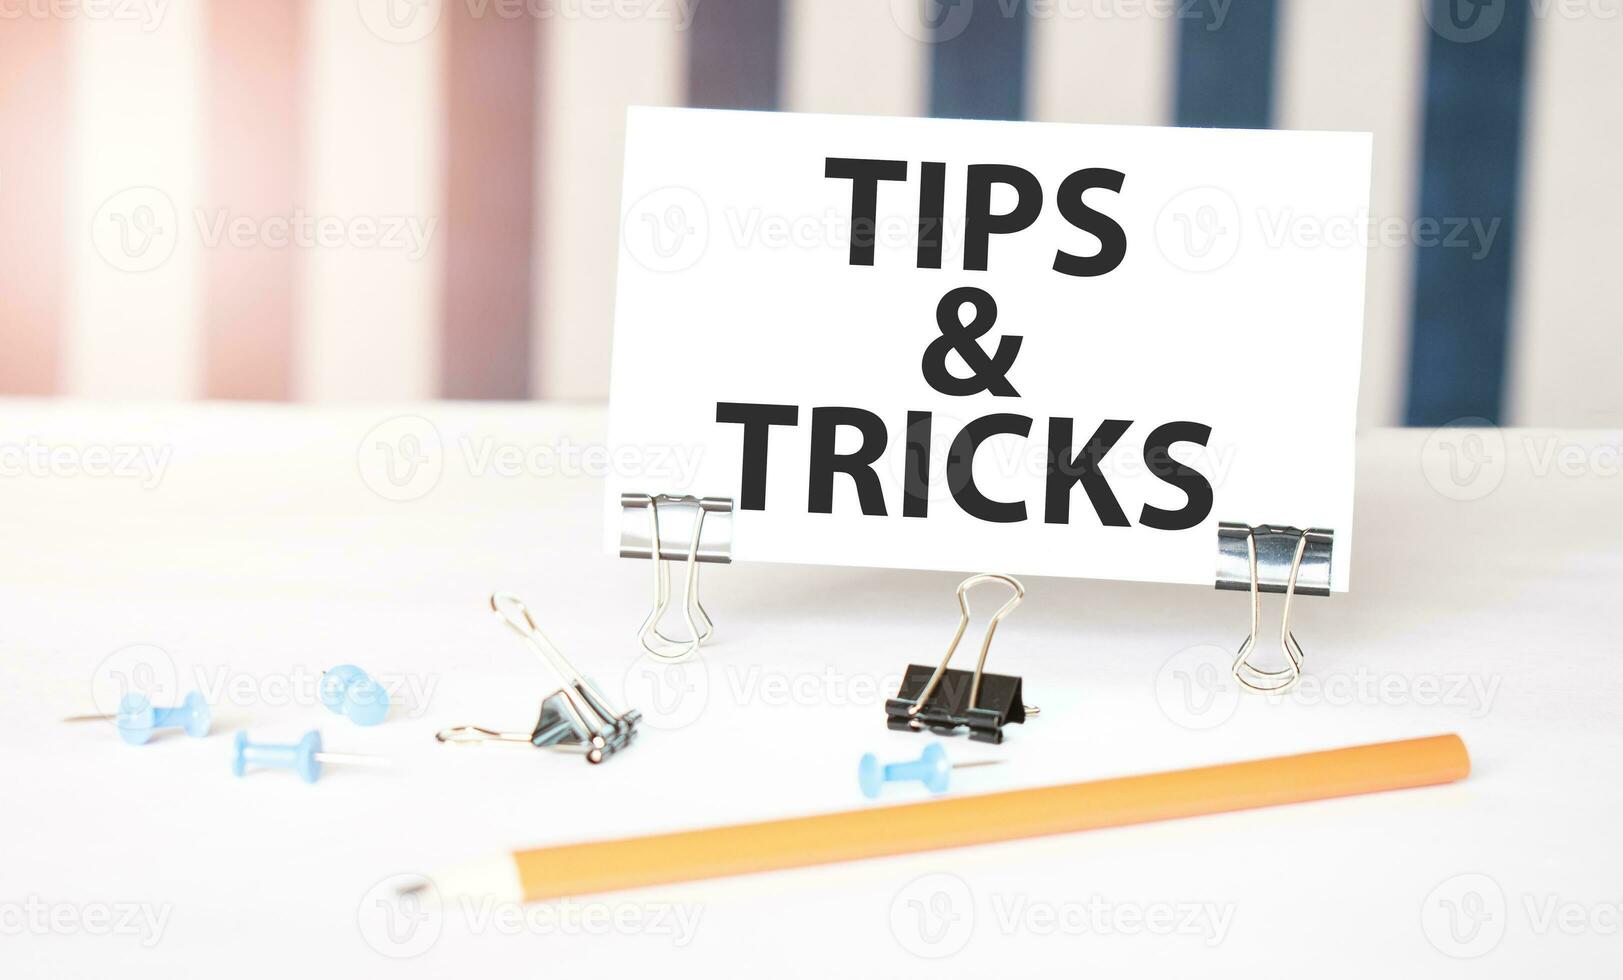 TIPS AND TRICKS sign on paper on white desk with office tools. Blue and white background photo